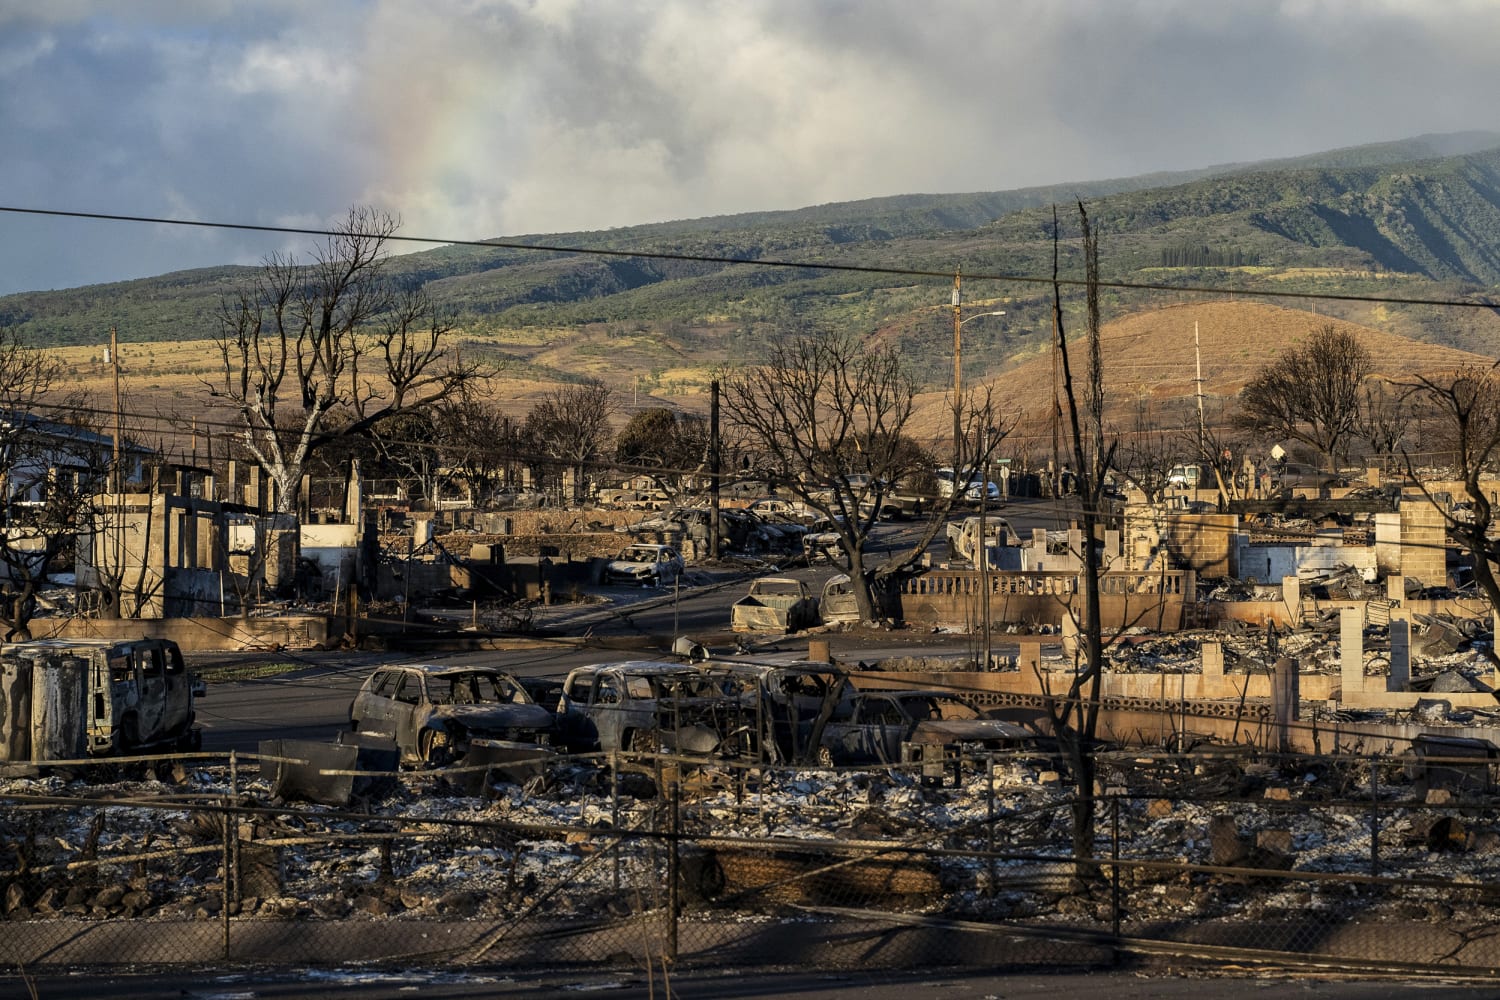 Maui wildfire becomes latest fodder for disaster conspiracy theorists